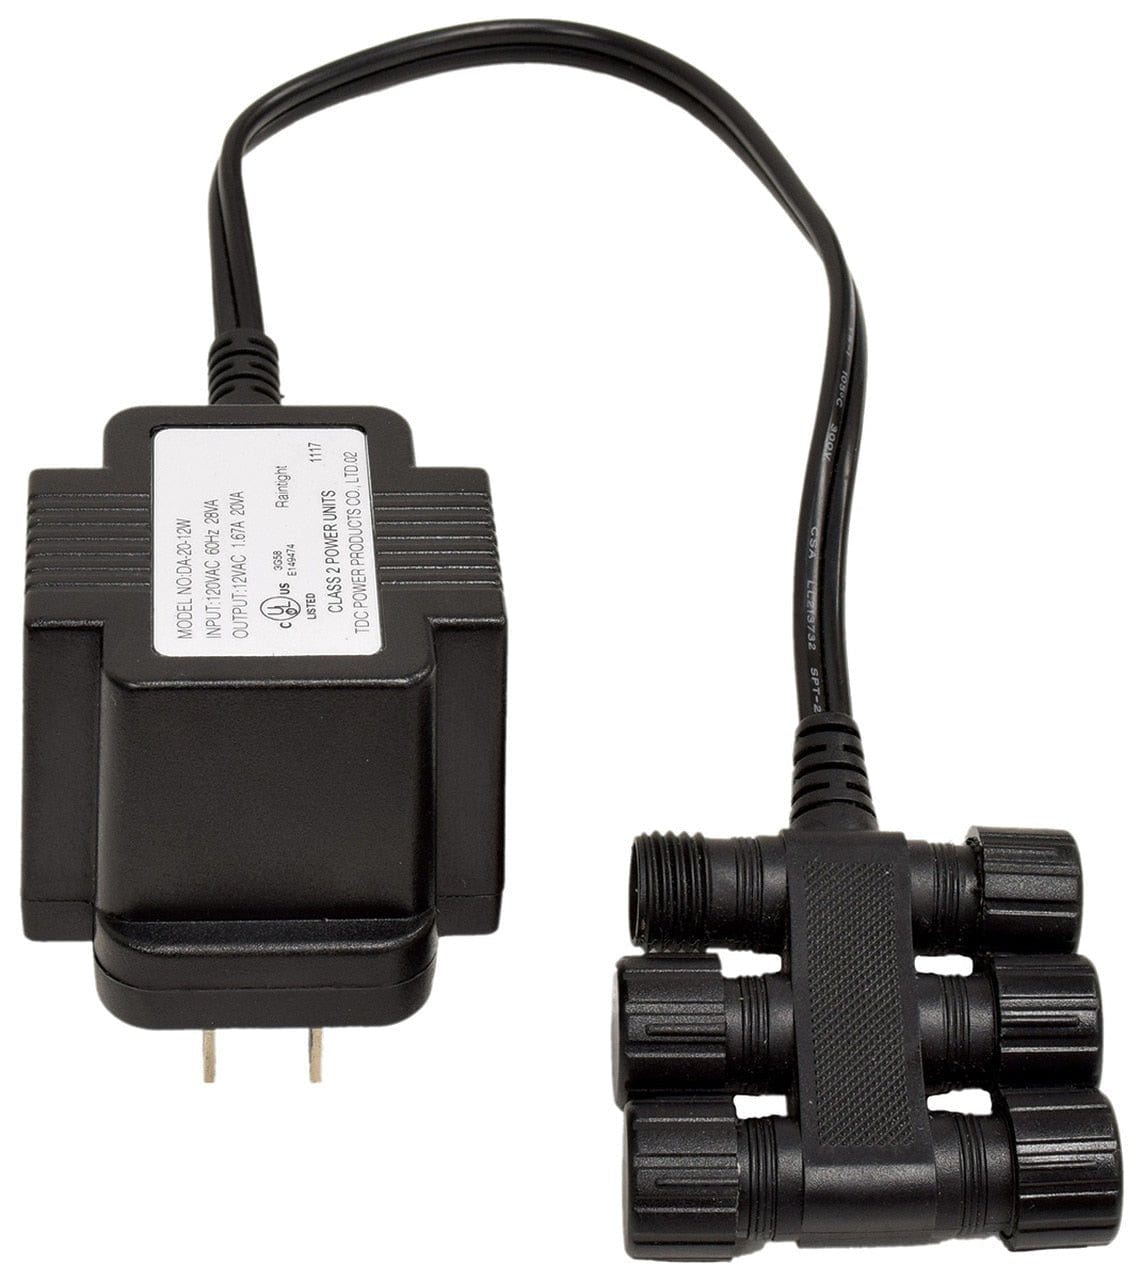 EasyPro Lighting and Transformers EasyPro Transformer w/ 6 Quick Connects - 20 Watt